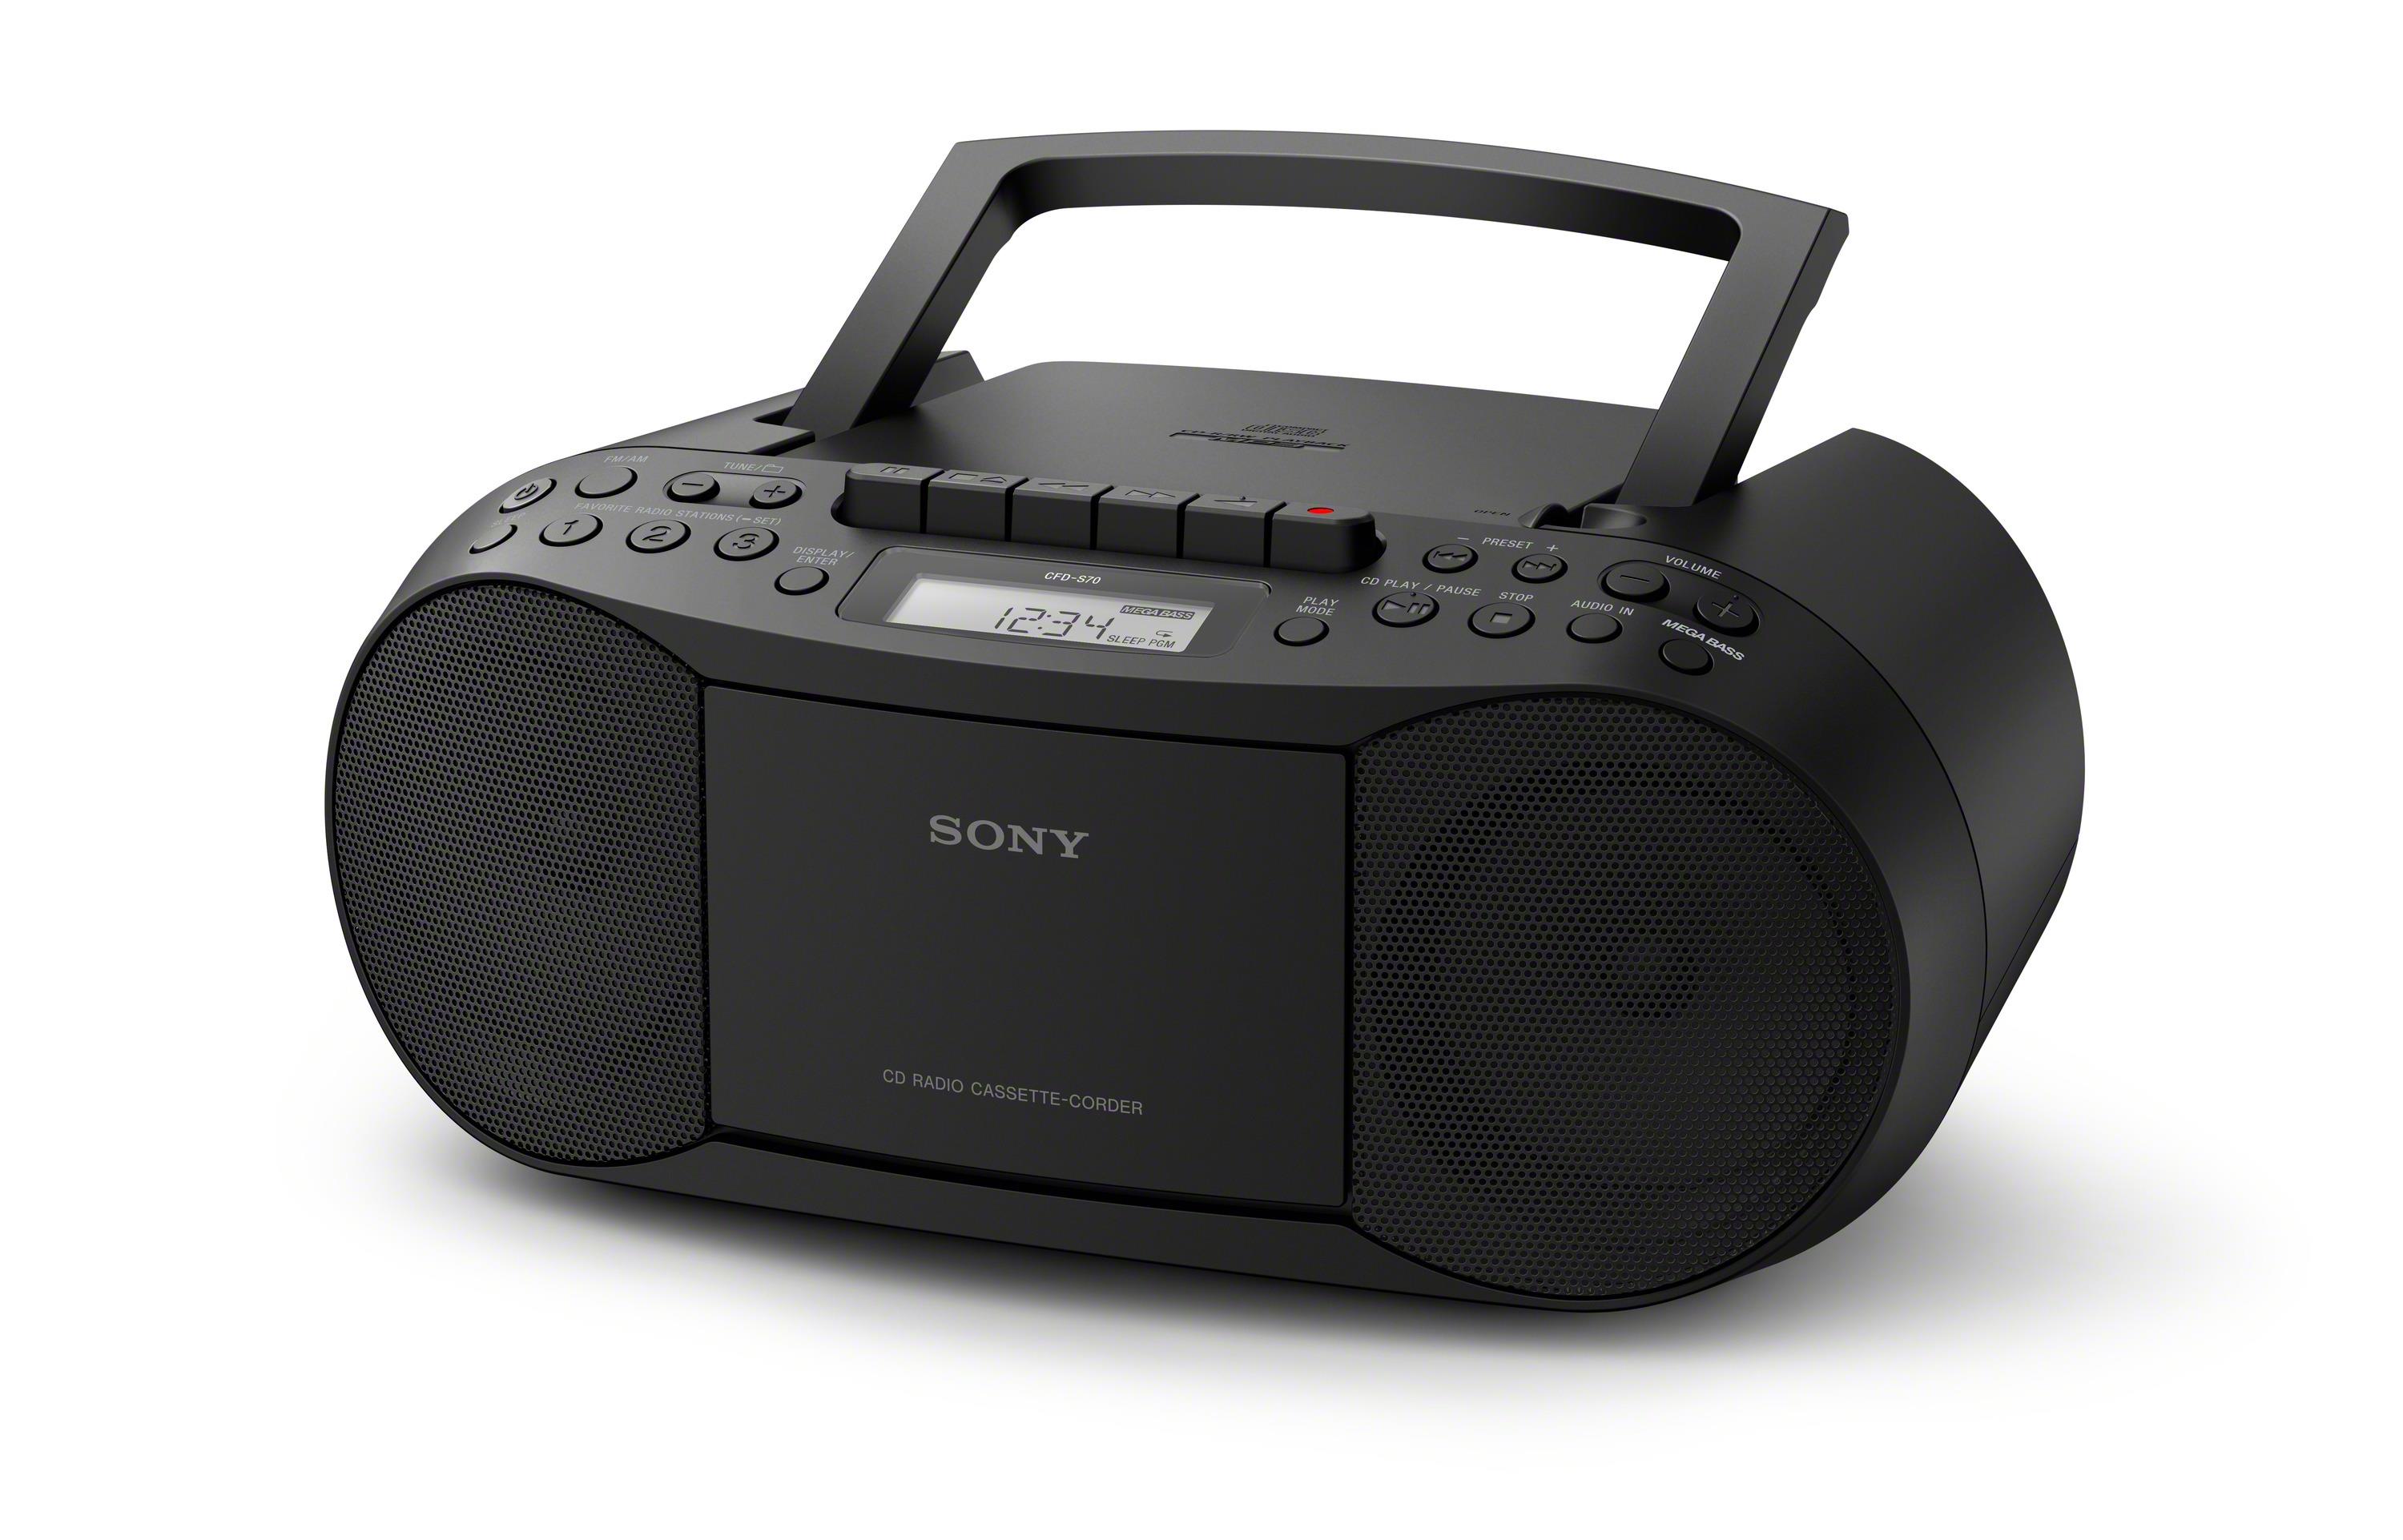 Sony Boombox Cd Cassette Player Hot Sex Picture